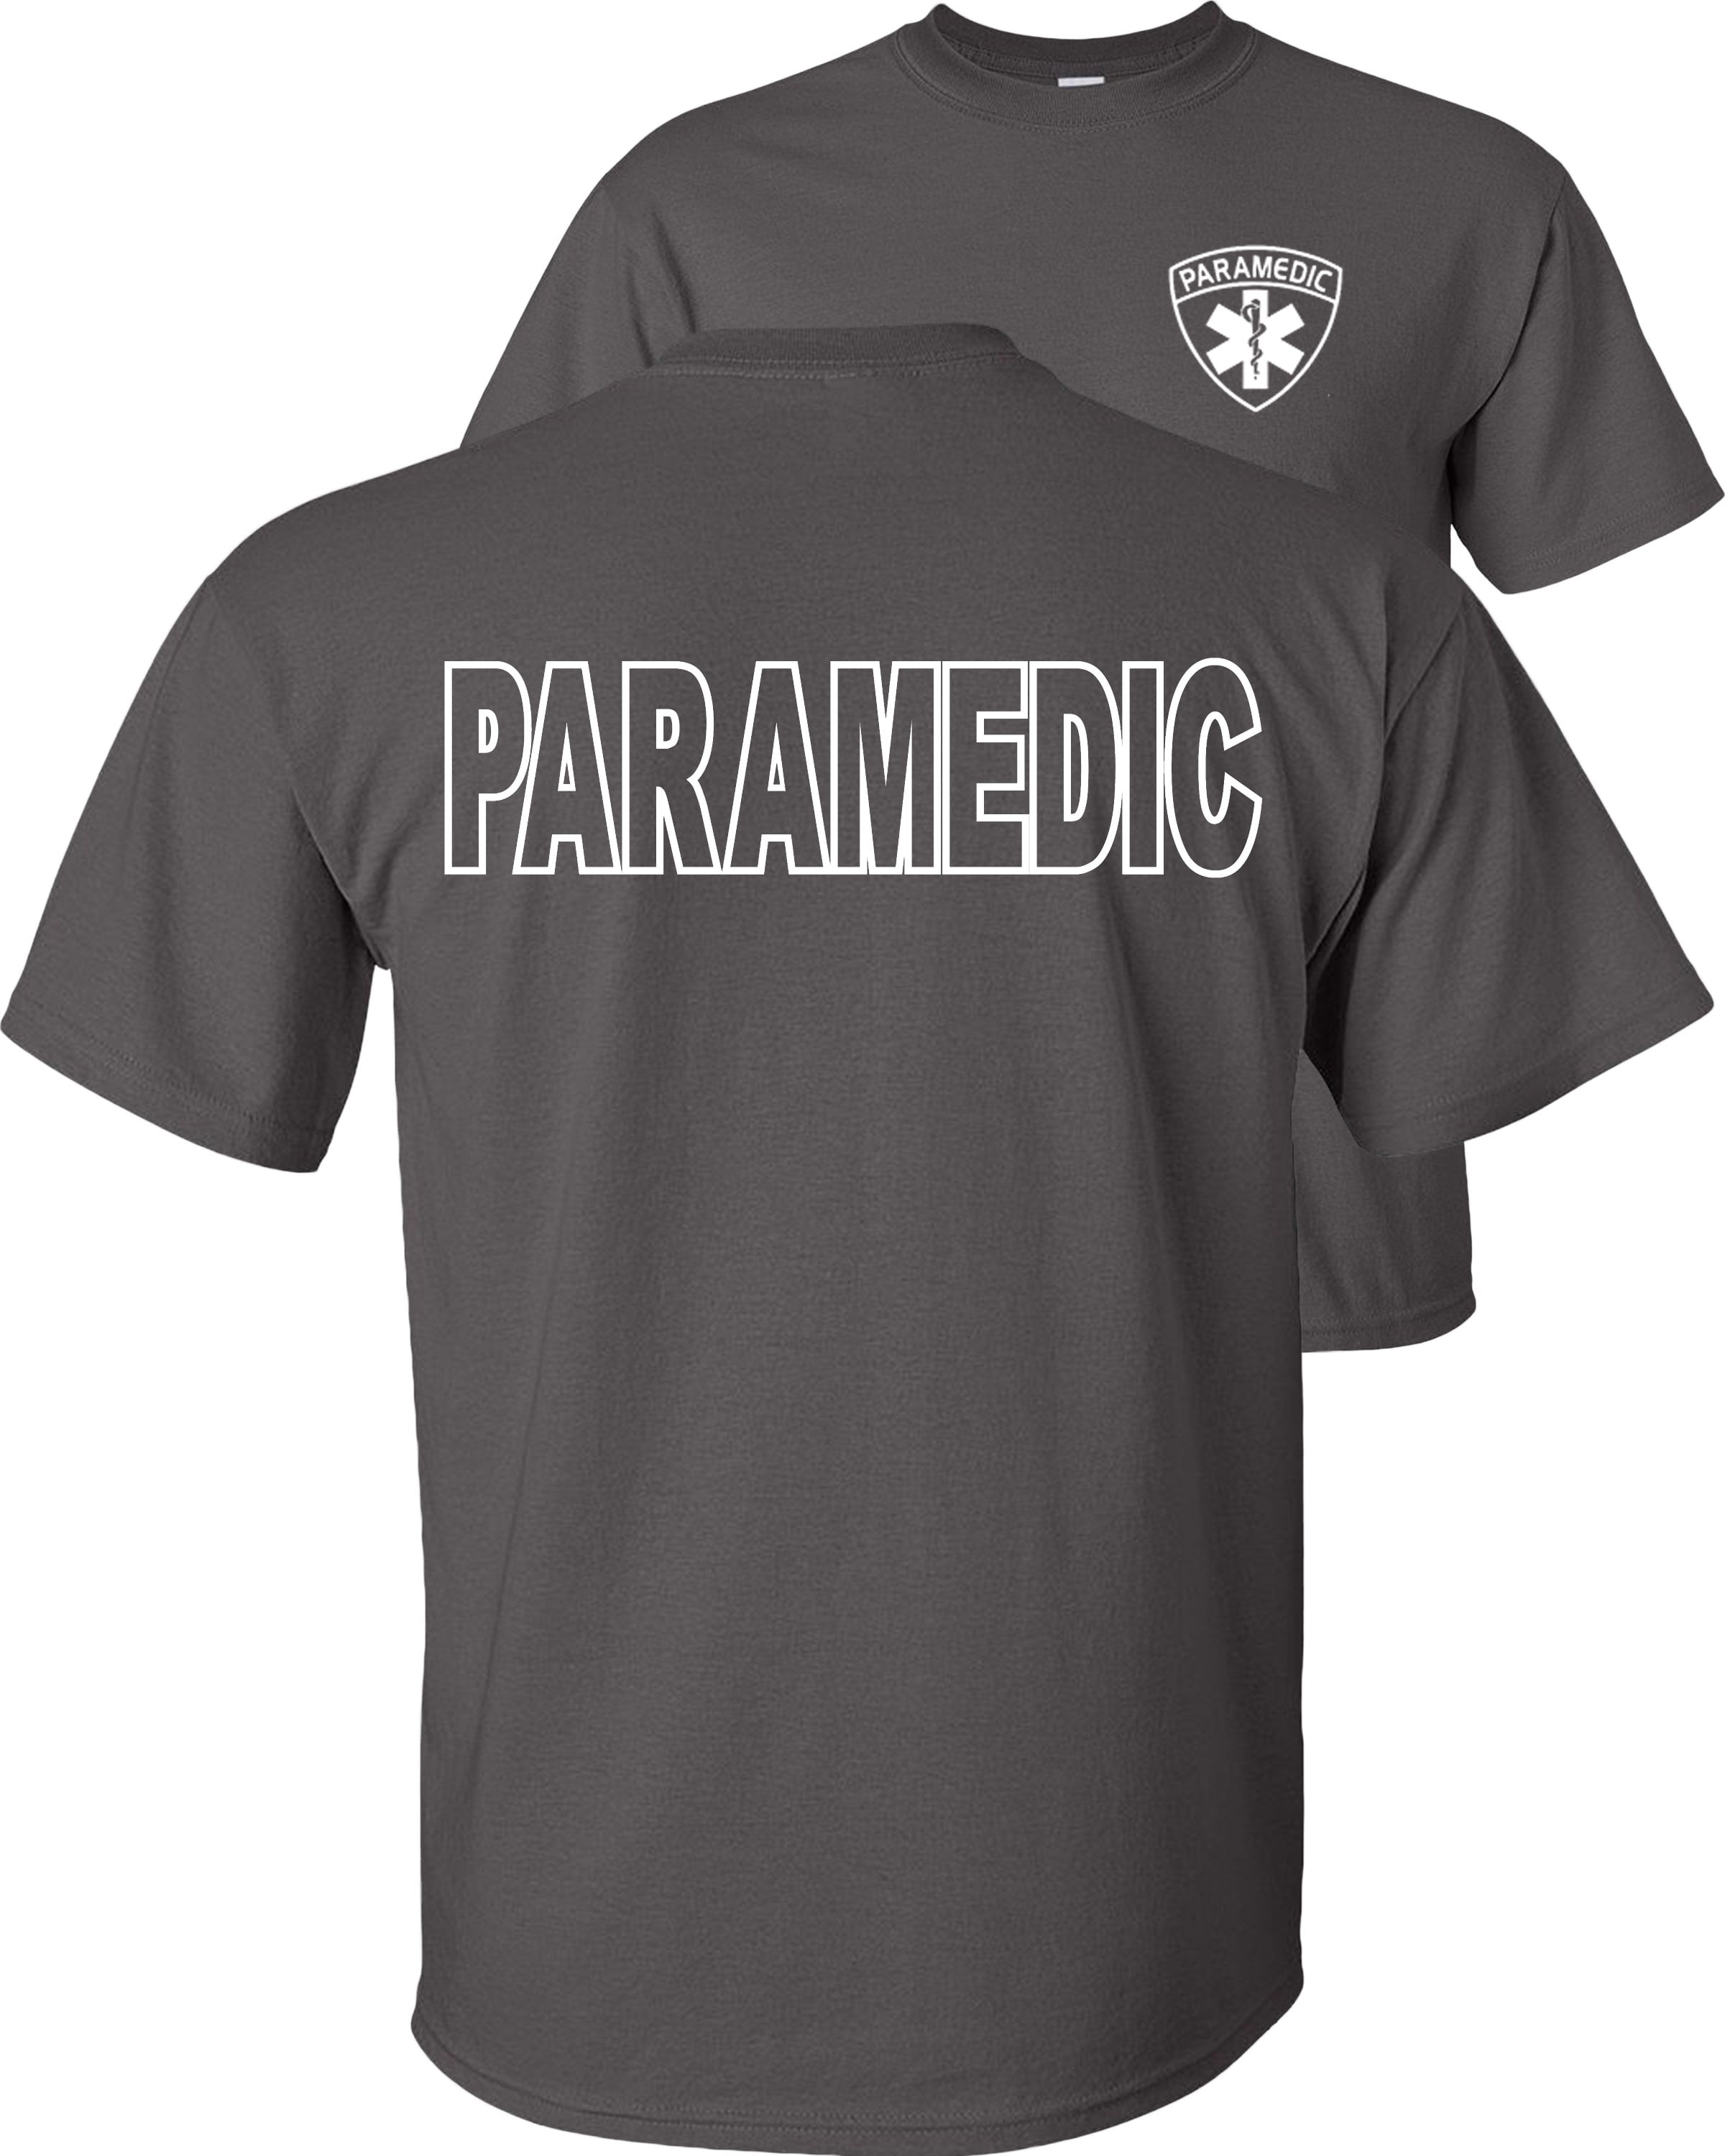 Paramedic-Firefighter Emergency Services T shirts  Hanes Short Sleeve All sizes 